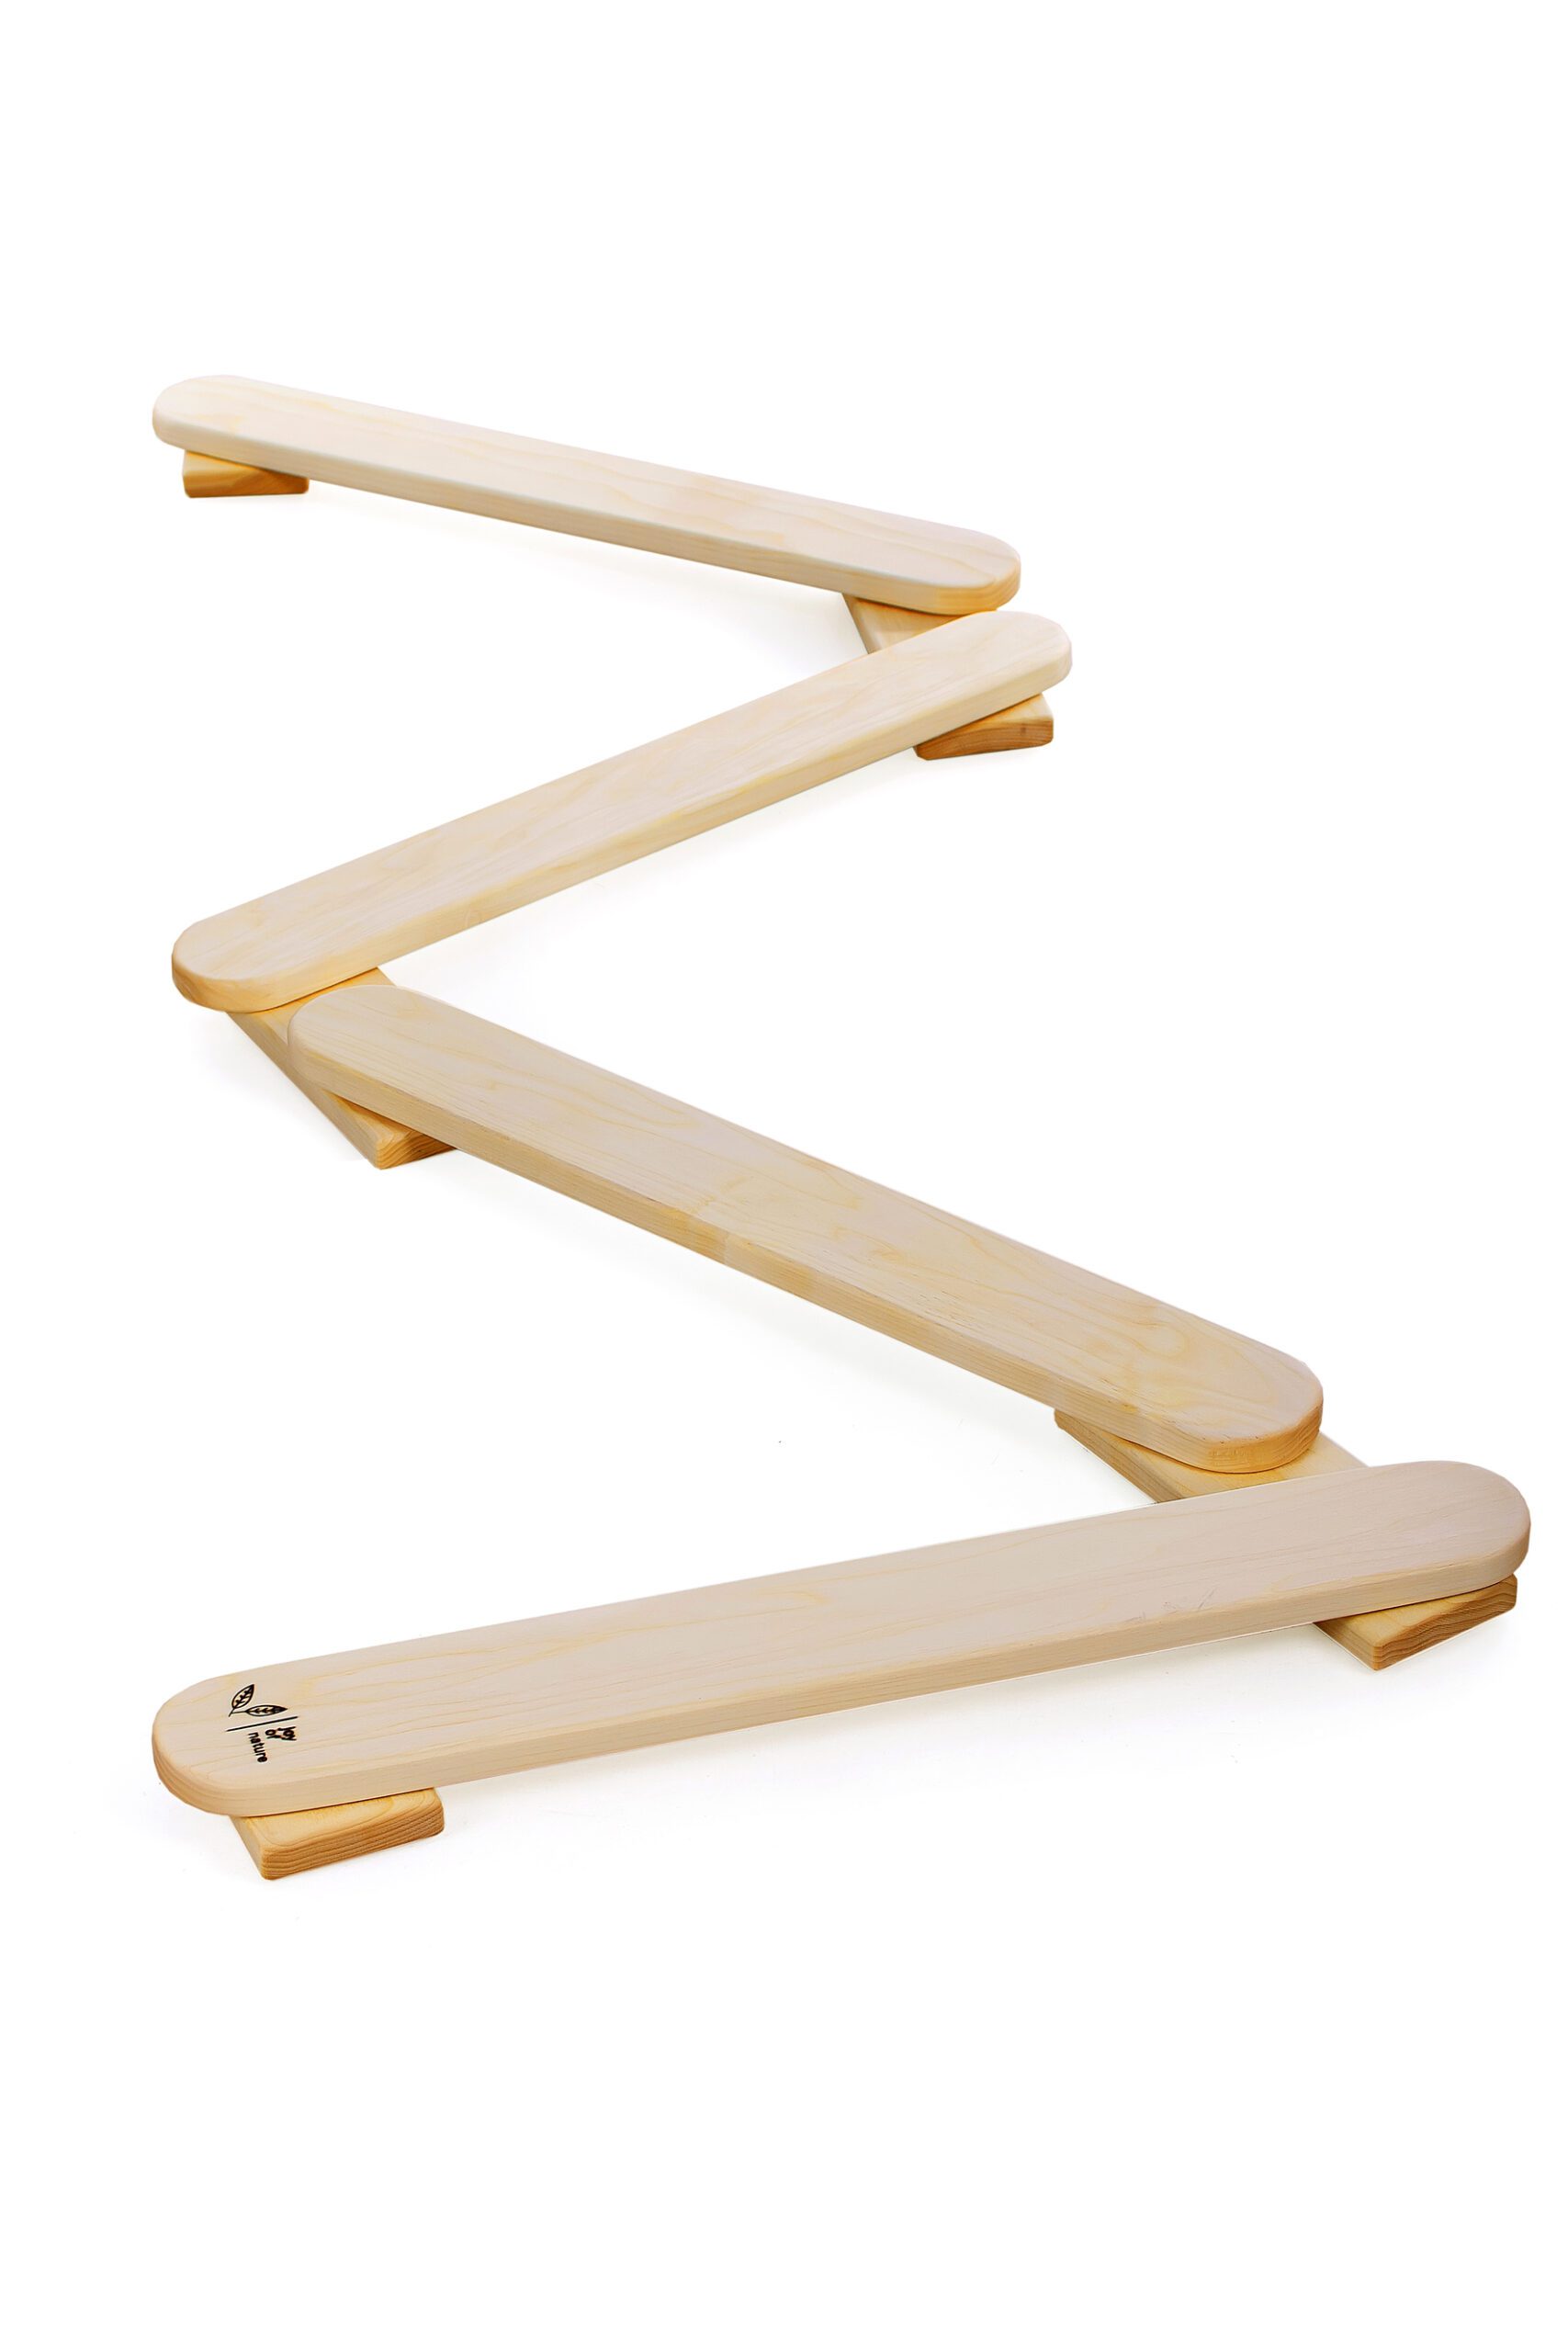 Toddler balance beam for sale. The photo was taken by a photographer Ainars Mazjanis.